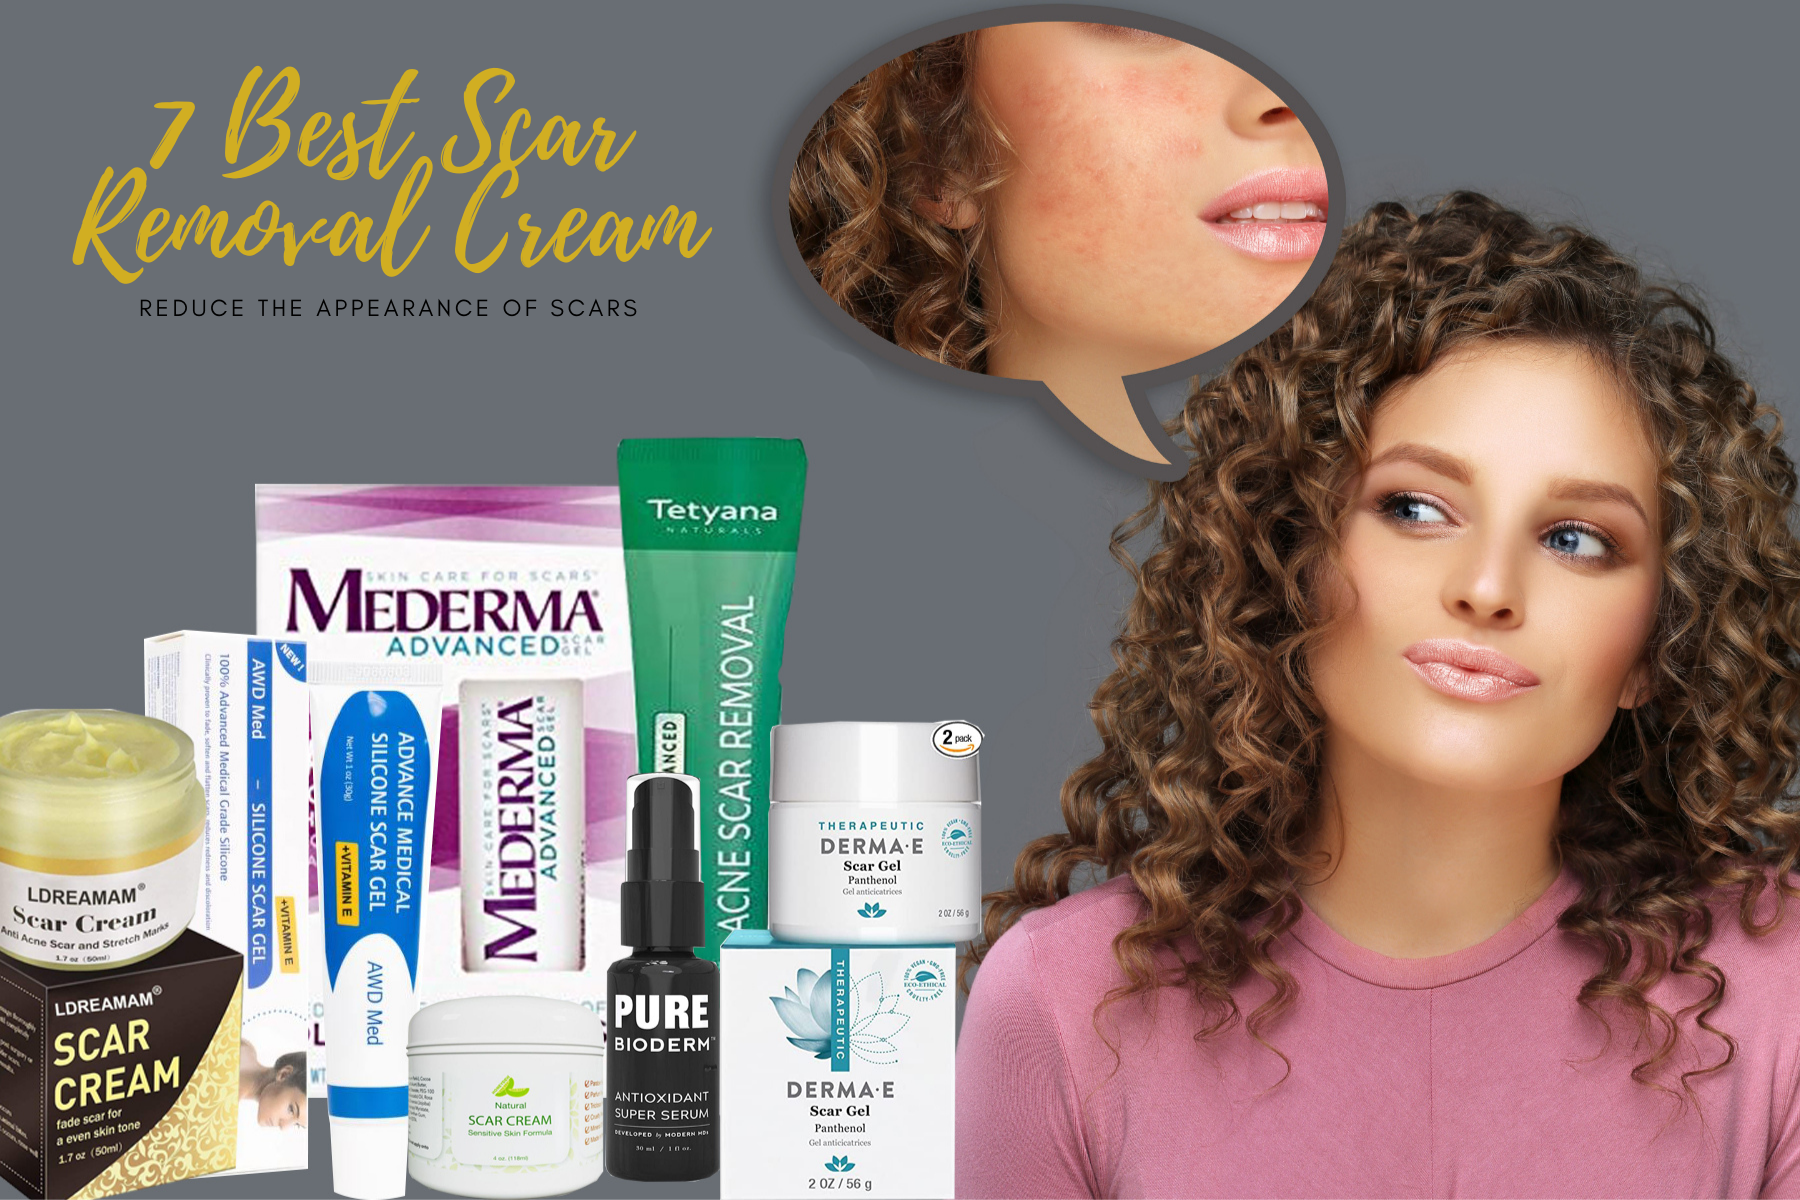 The 7 Best Scar Removal Creams: Reduce the Appearance of Scars